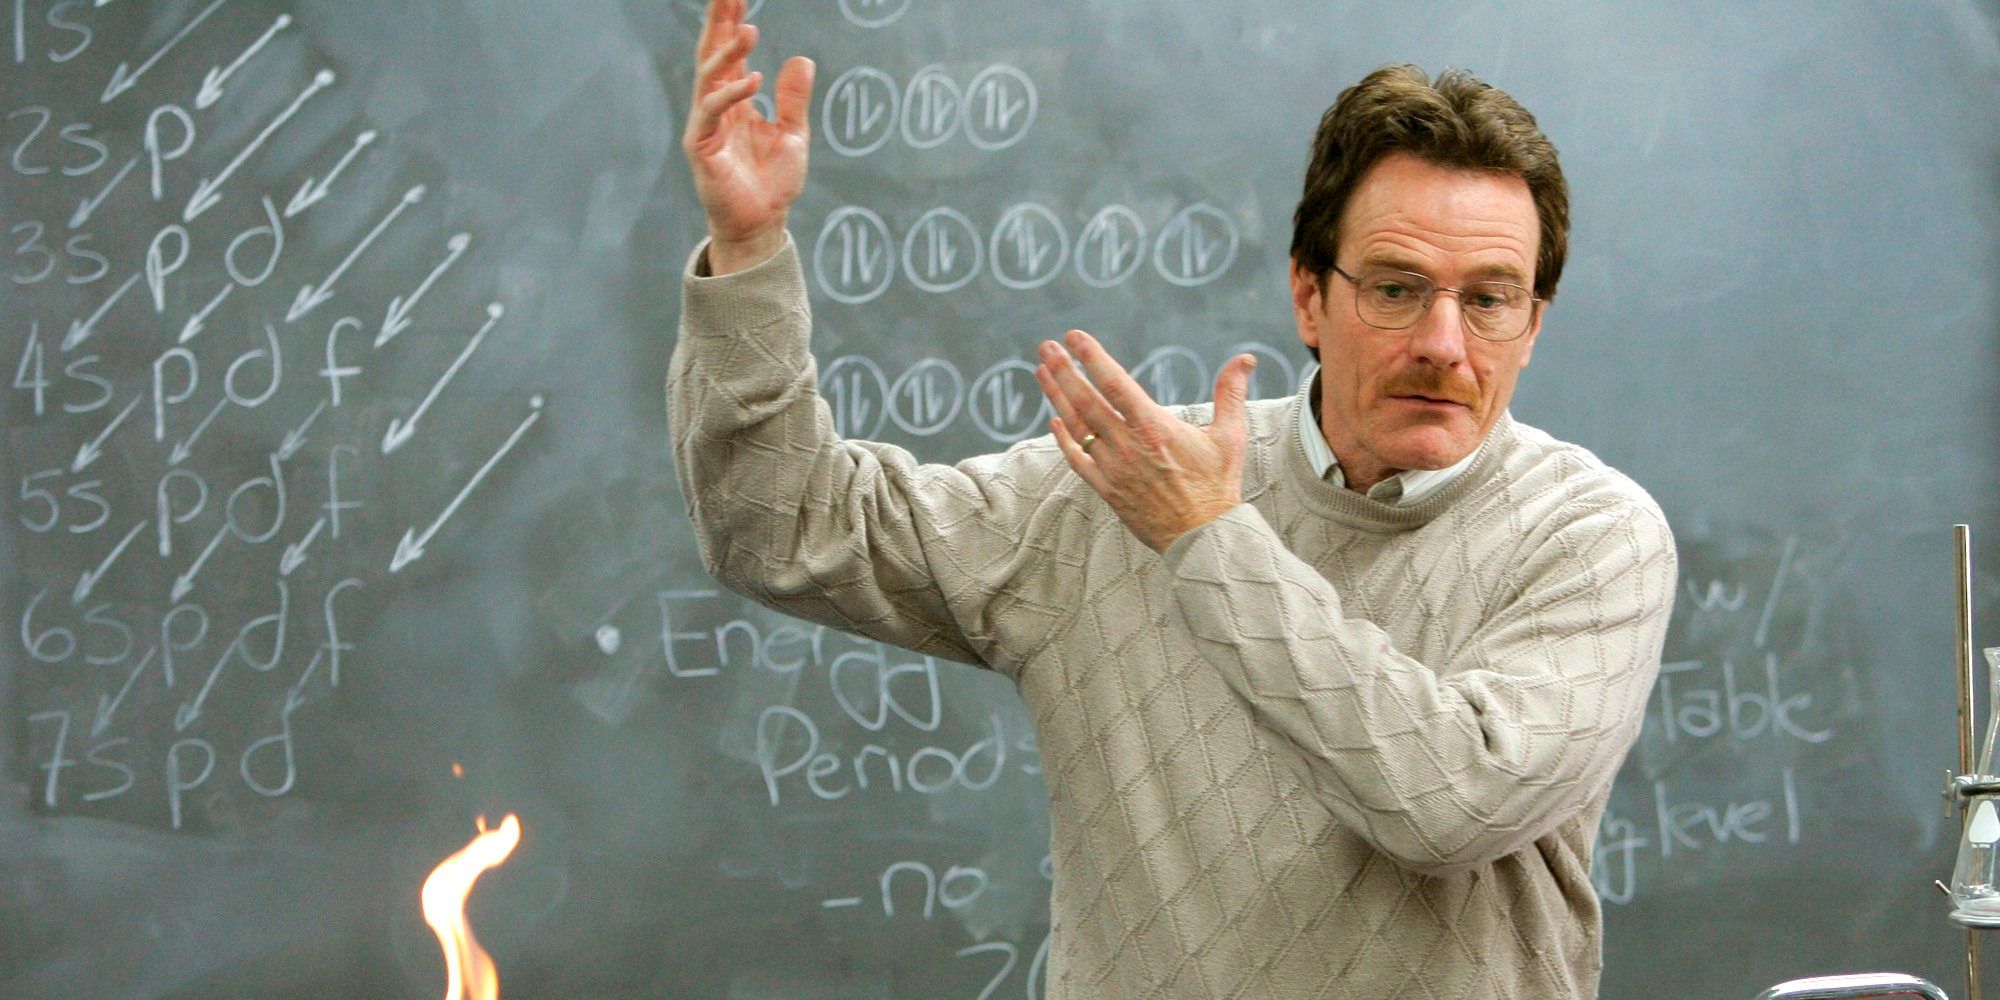 Walter White in the pilot episode of Breaking Bad, standing by a chalkboard in chemistry class.